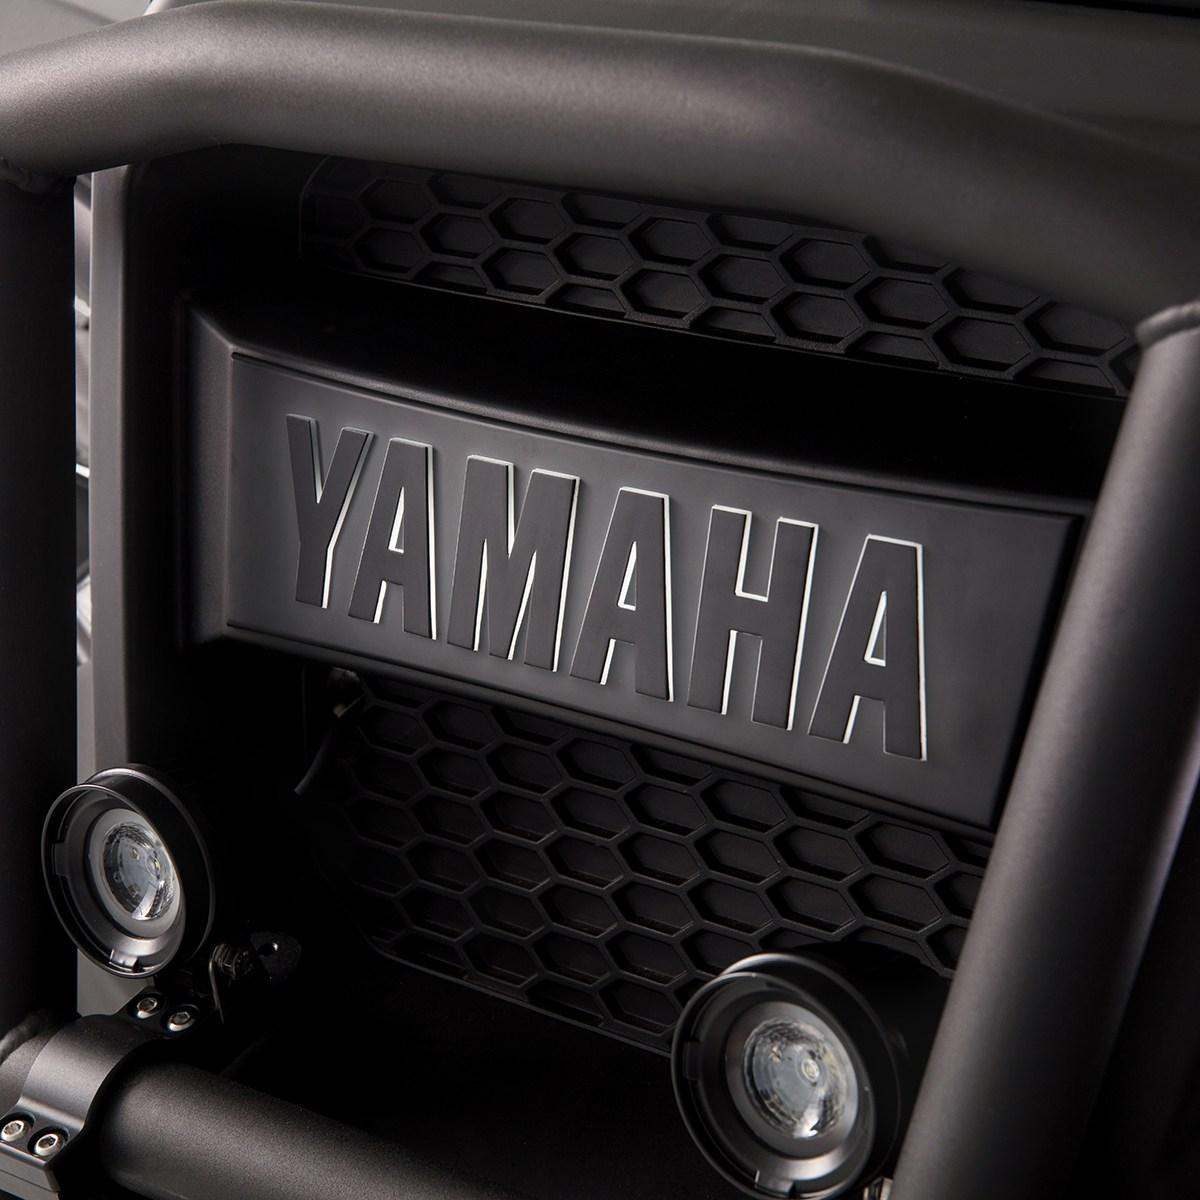 Get noticed with the Front Grill “YAMAHA” Backlit Logo. This product replaces the stock logo with a sleek LED backlit counterpart.